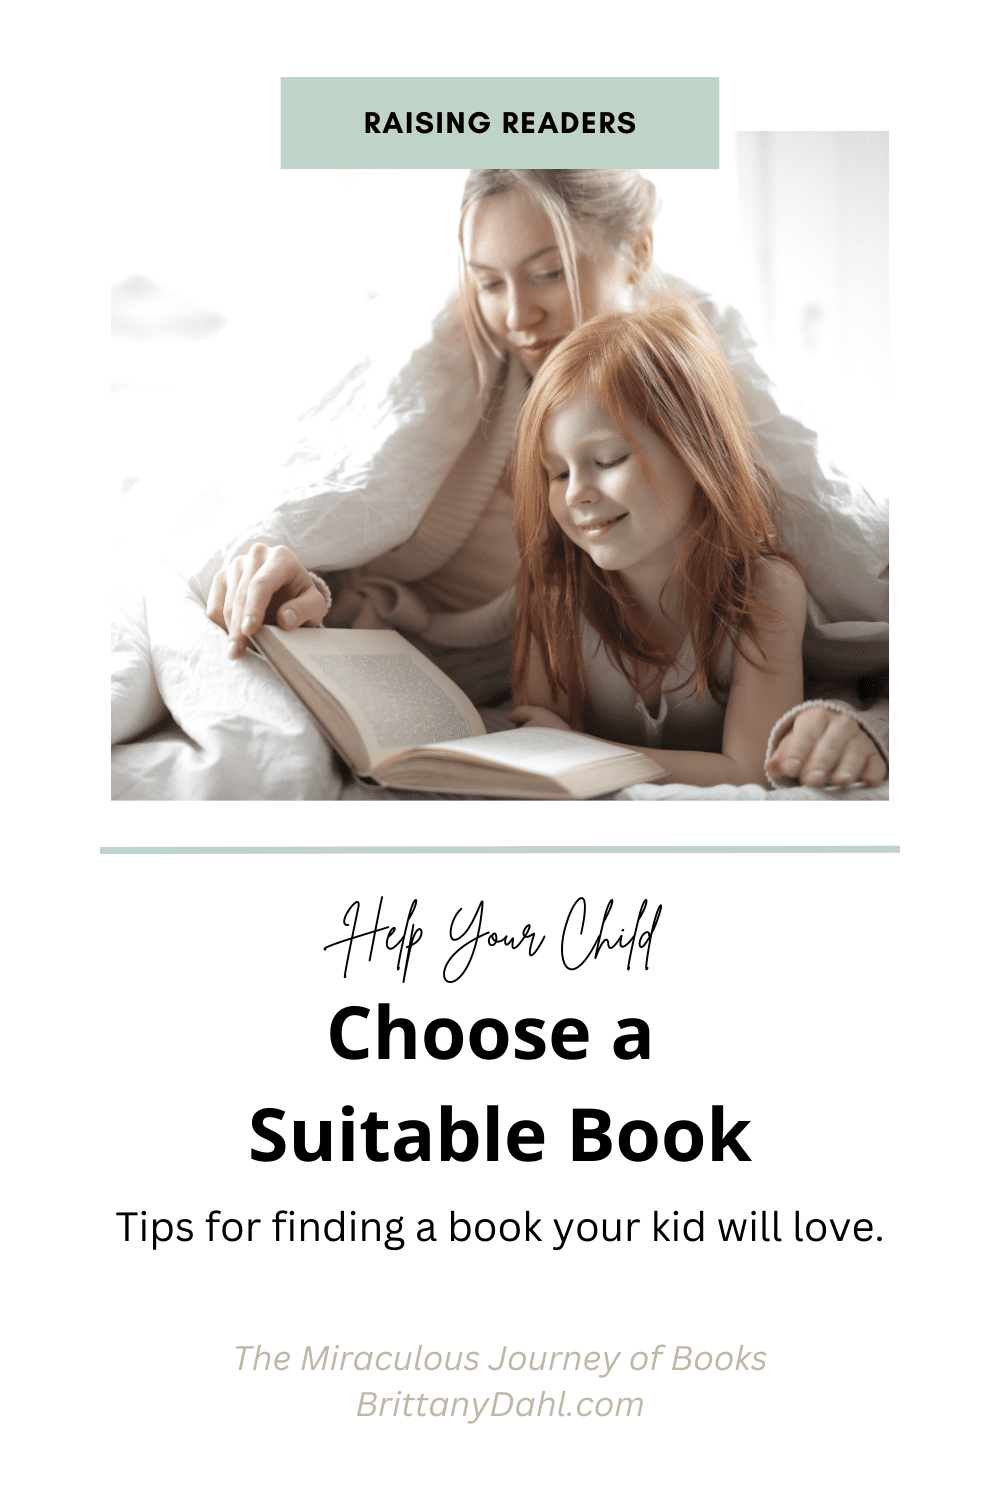 Help your child choose a suitable book. Tips for finding a book your child will love. The Miraculous Journey of Books at Brittanydahl.com. Image of mother and daughter reader together wrapped in a blanket.